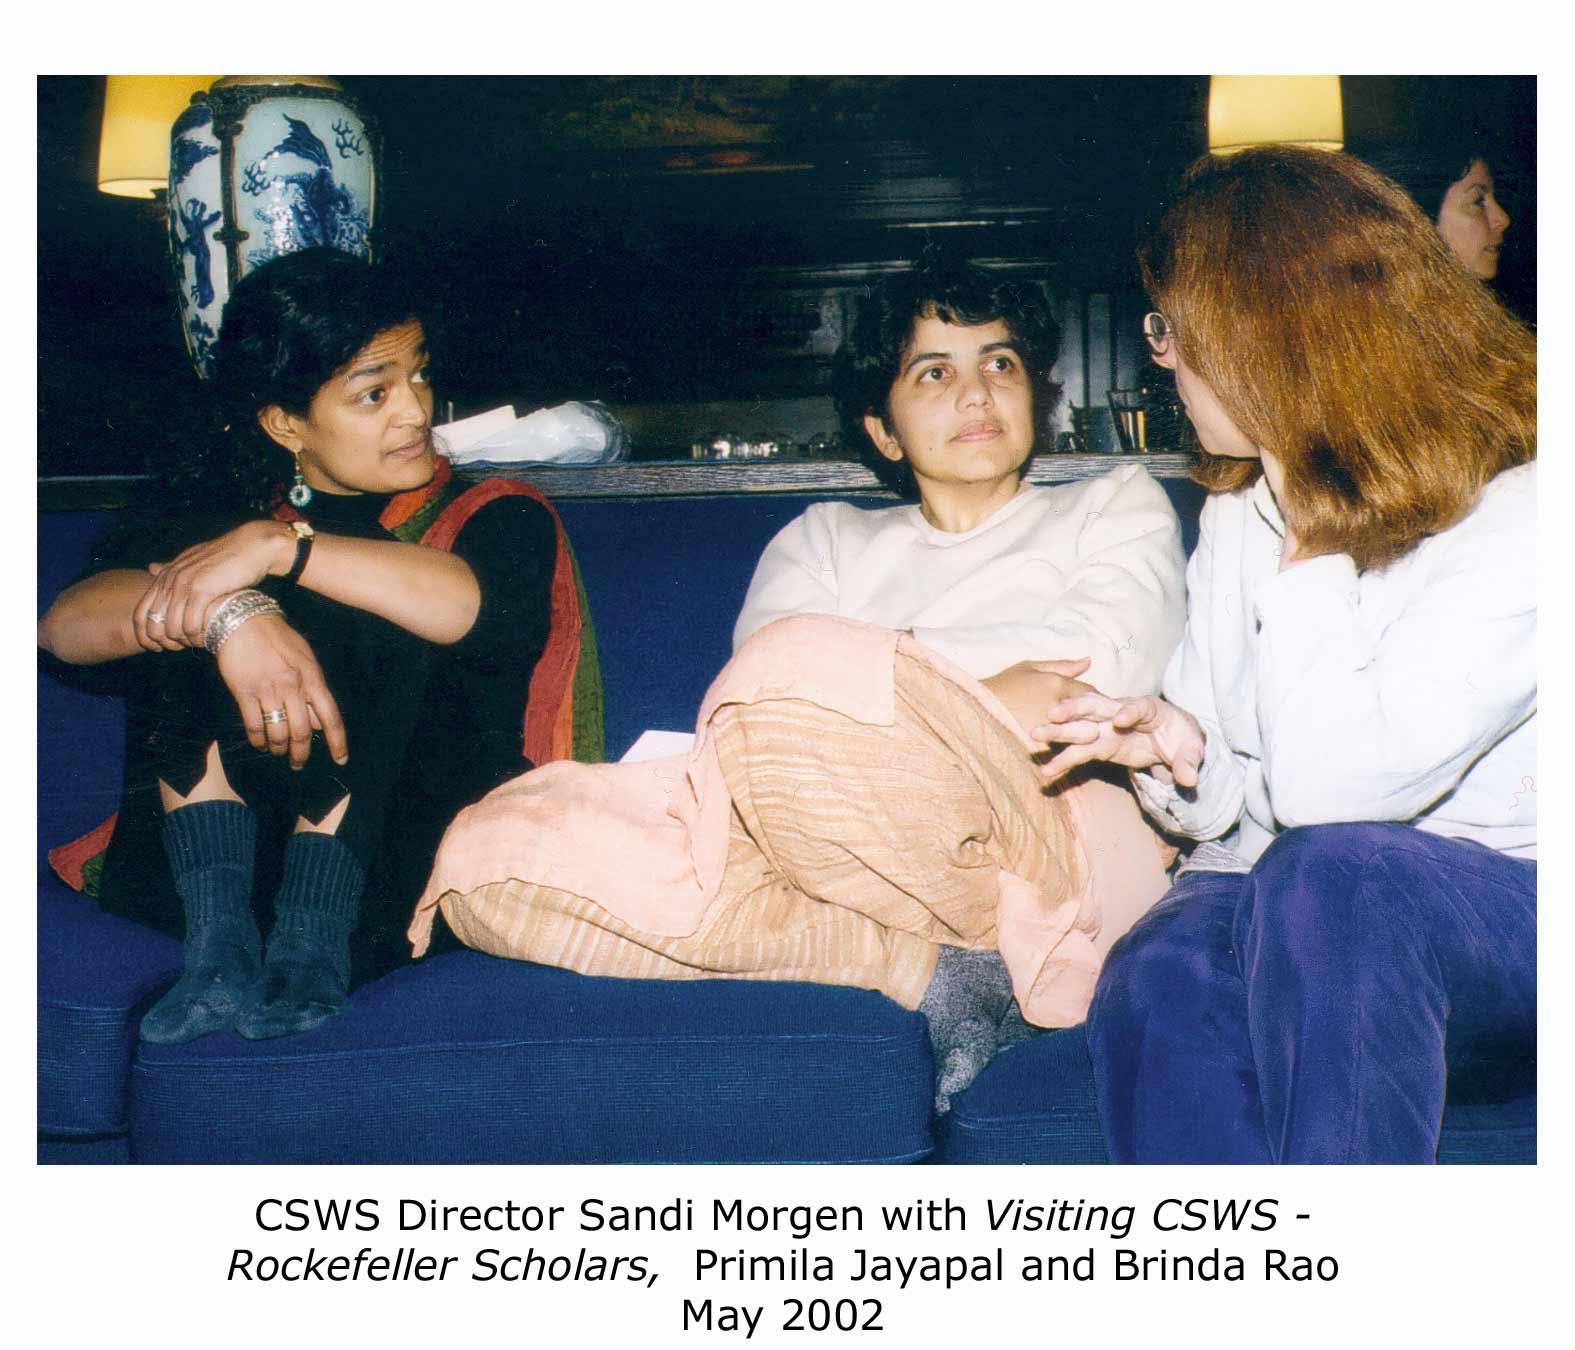 Pictured are former CSWS Director Sandi Morgen with visiting CSWS-Rockefeller Scholars Primila Jayapal and Brinda Rao in May 2002.